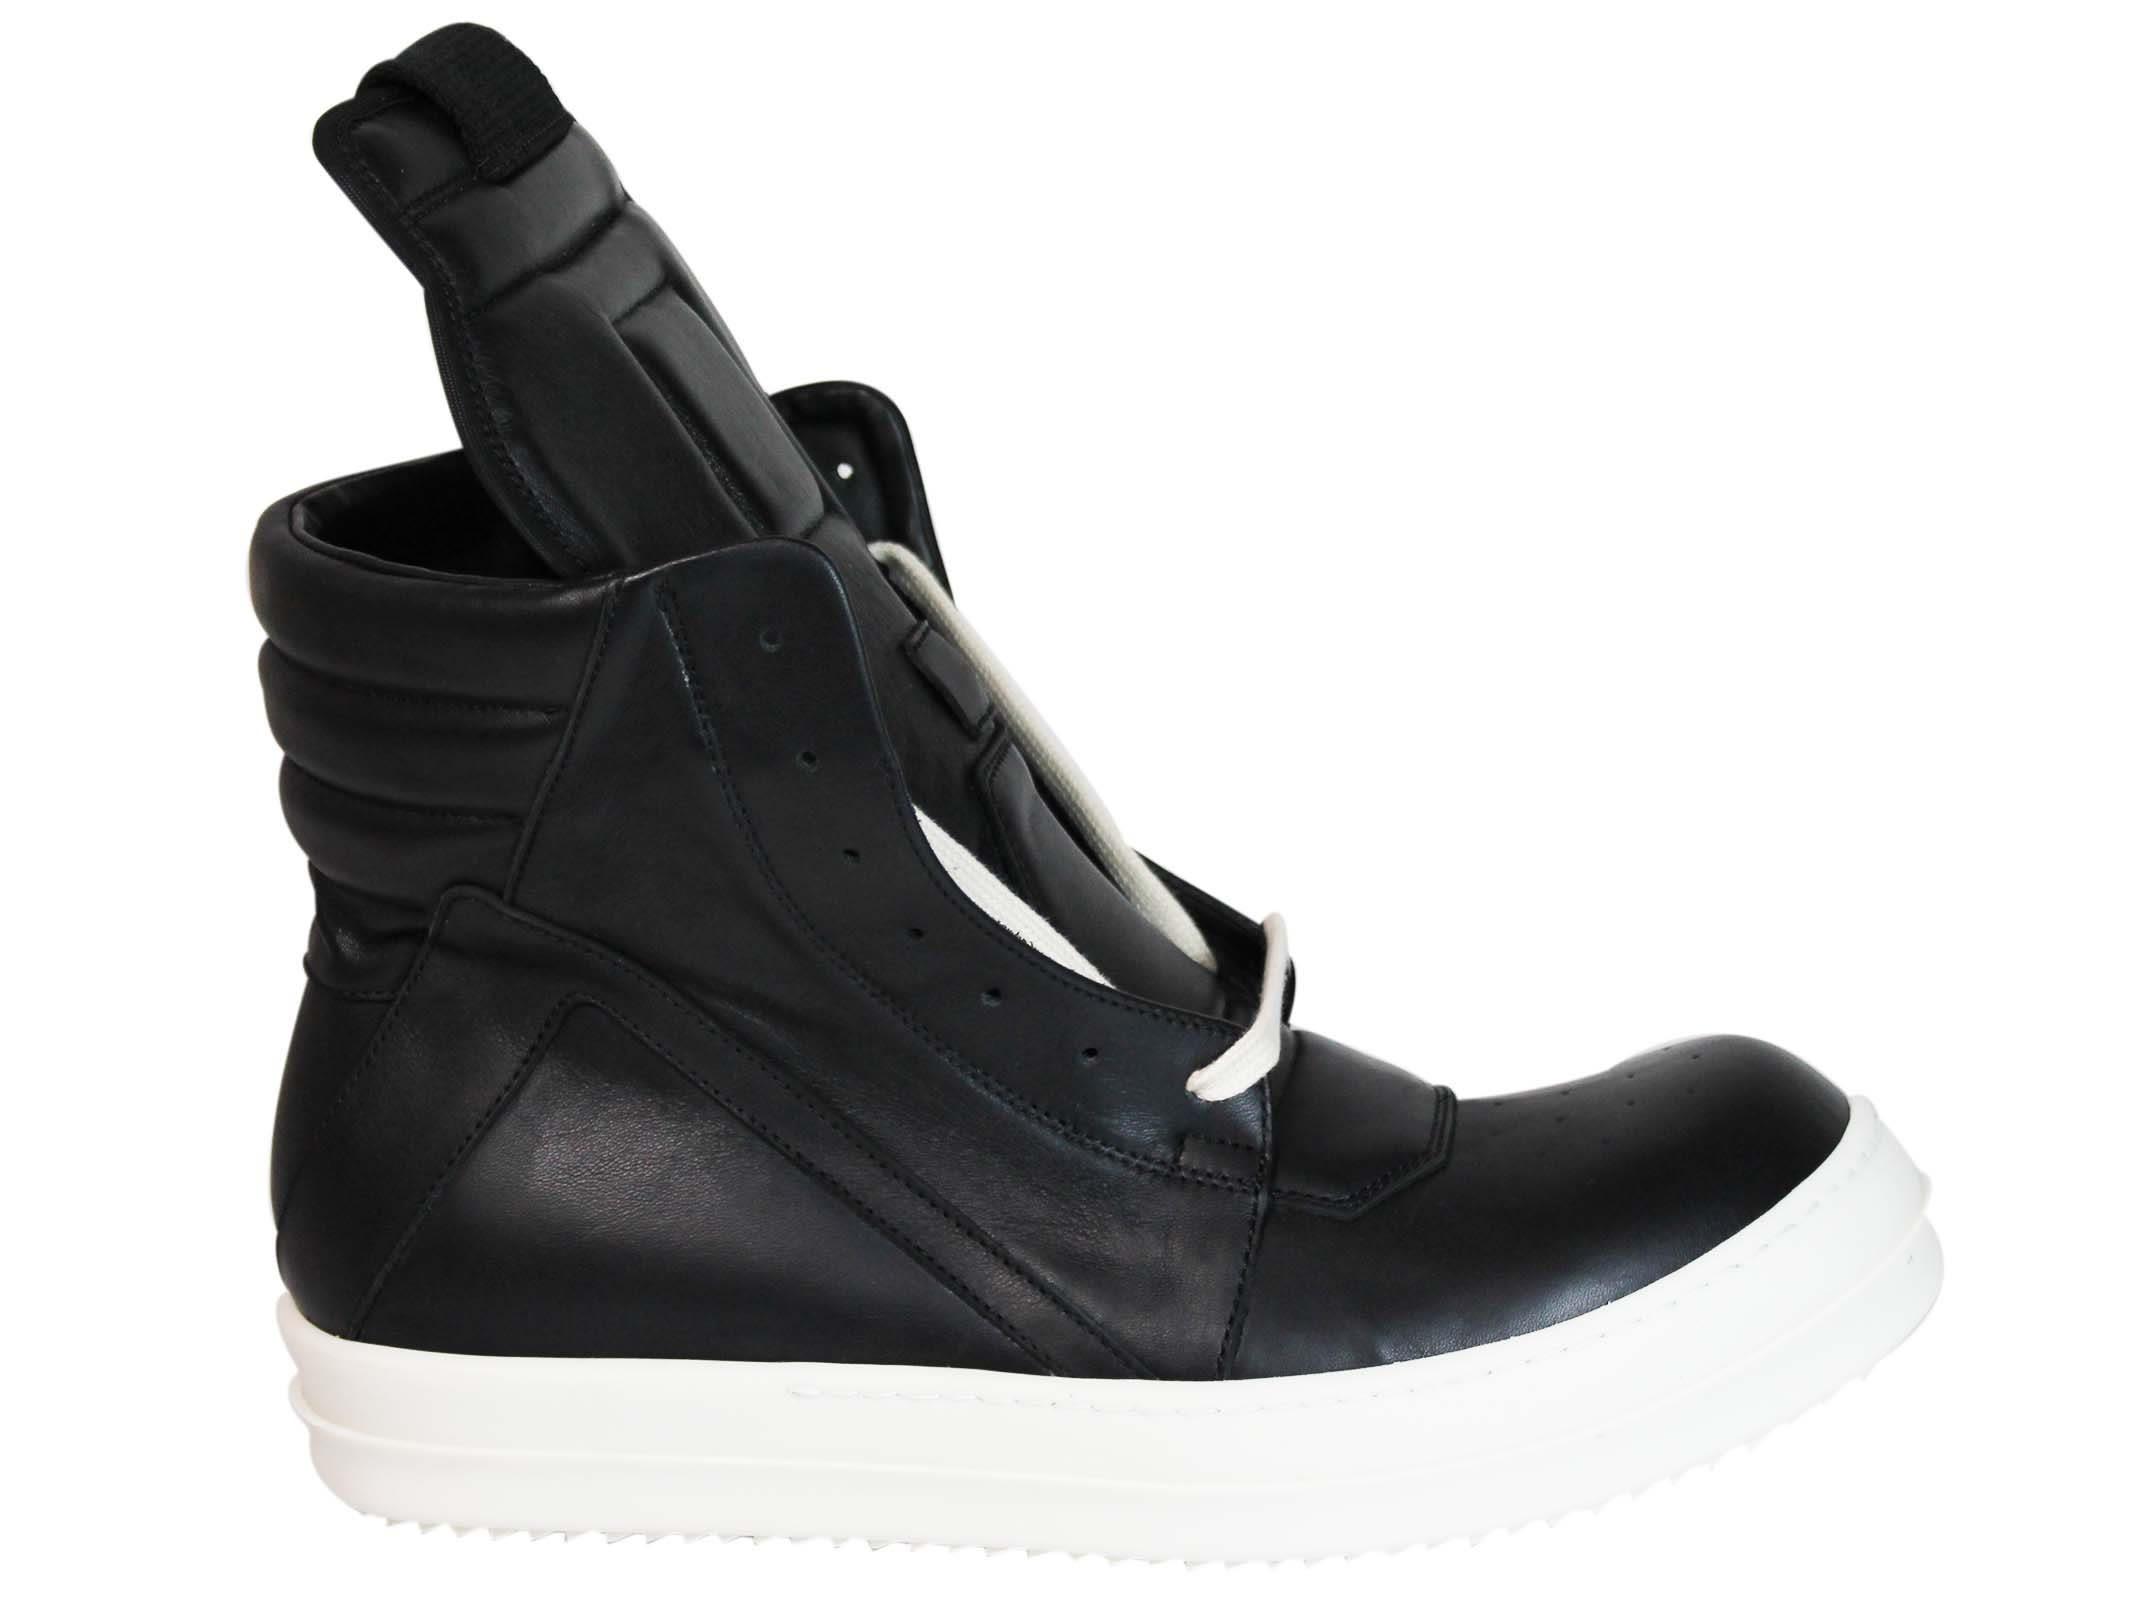 Rick Owens Black And White Geobasket High Sneakers | ModeSens